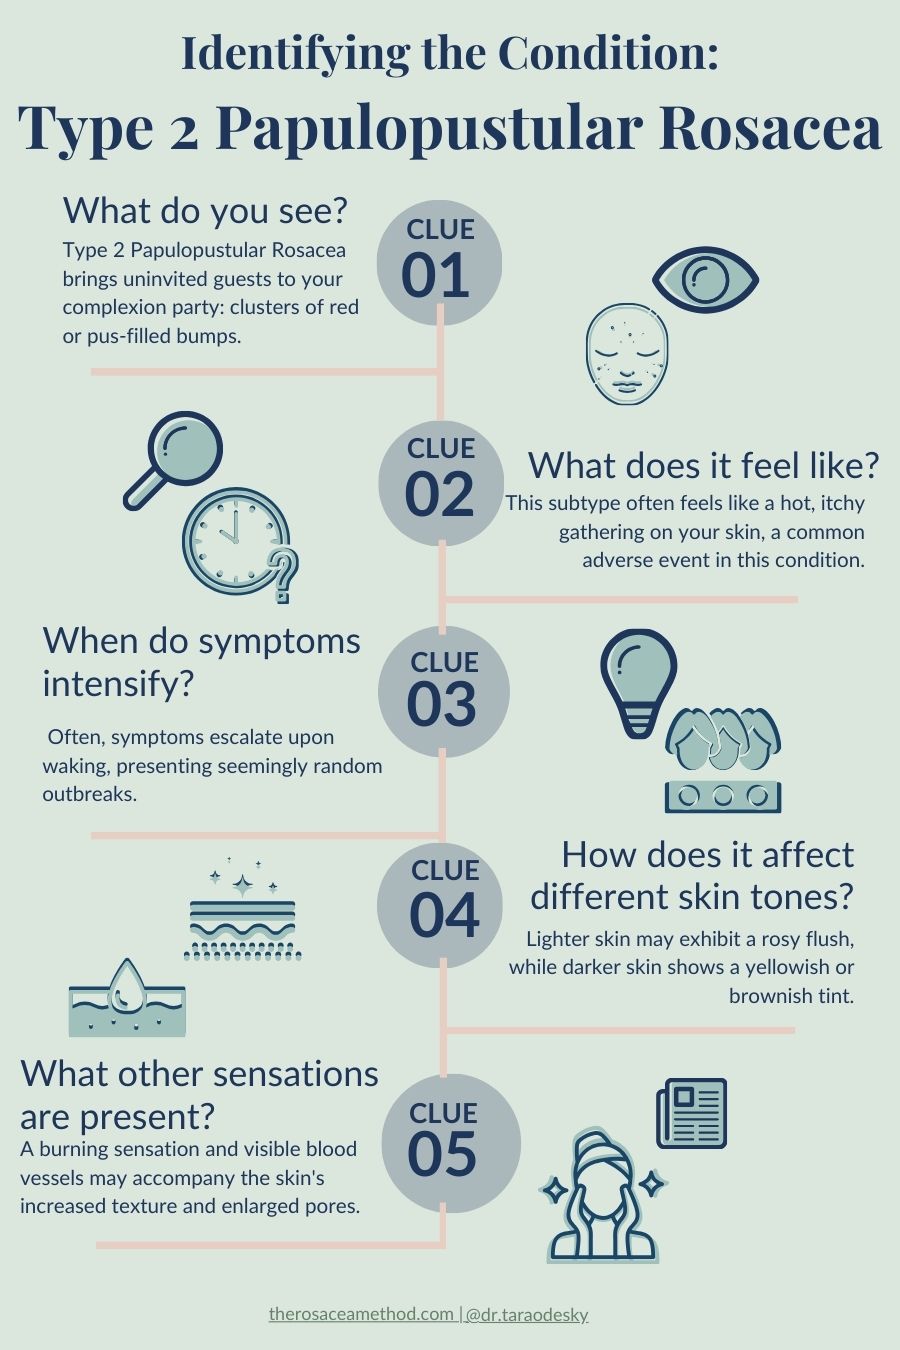 Infographic comparing Type 2 Papulopustular Rosacea vs Acne, featuring five clues to differentiate them. Clue 1: Type 2 Papulopustular Rosacea presents as clusters of red or pus-filled bumps, typically appearing after age 30. Clue 2: It feels like a hot, itchy sensation on the skin, especially upon waking. Clue 3: Symptoms may intensify in the morning and outbreaks can seem random. Clue 4: Skin tone affects appearance, with lighter skin showing a rosy flush and darker skin a yellowish or brownish tint. Clue 5: Other sensations include a burning feeling, visible blood vessels, and possibly thickened skin with enlarged pores. Visit therosaceamethod.com for more information.